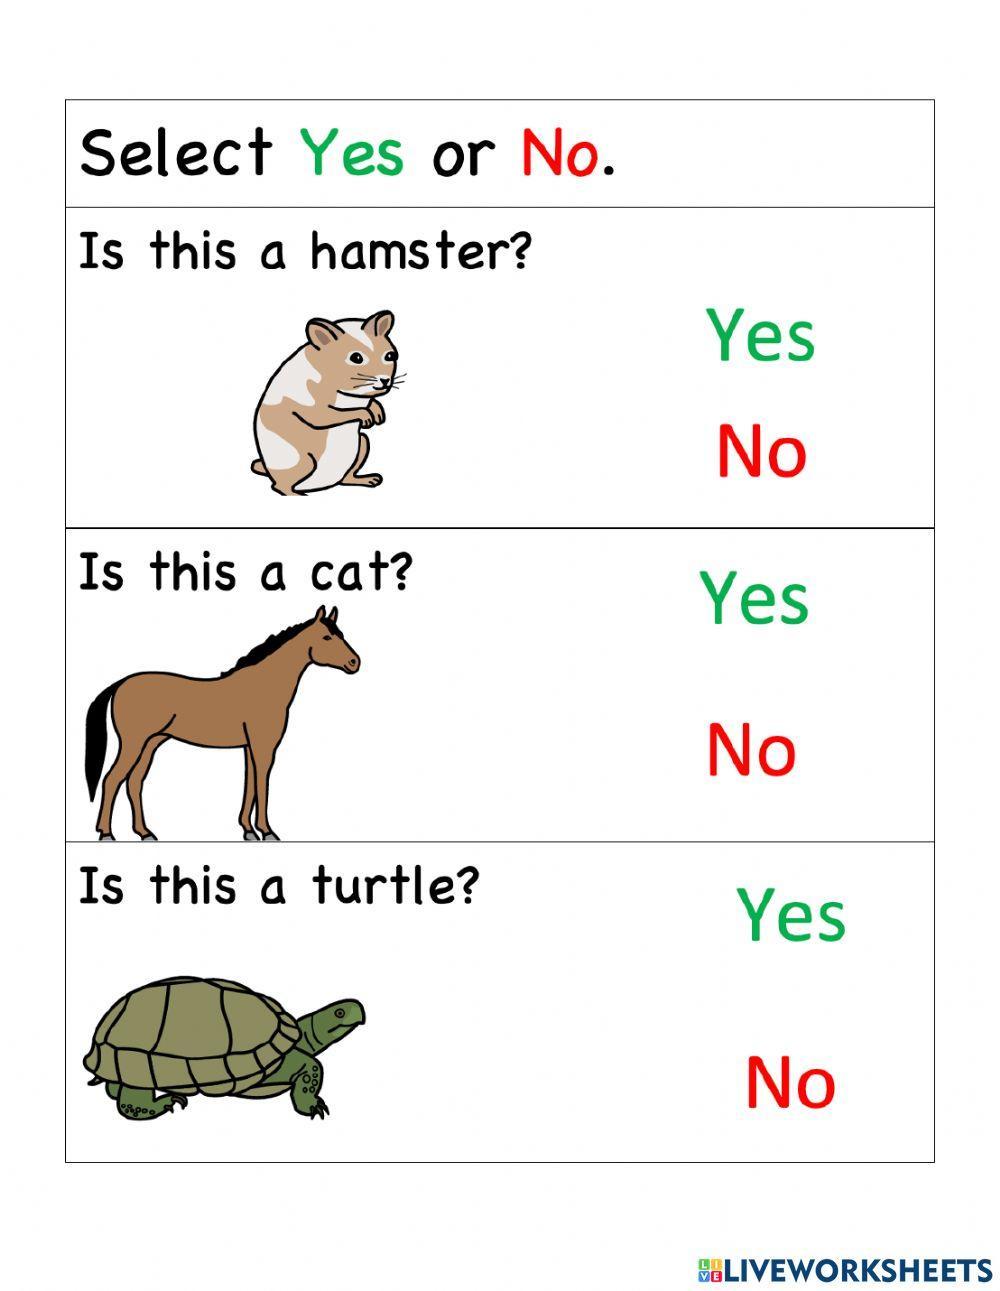 Pets - Select Yes or No for each picture.